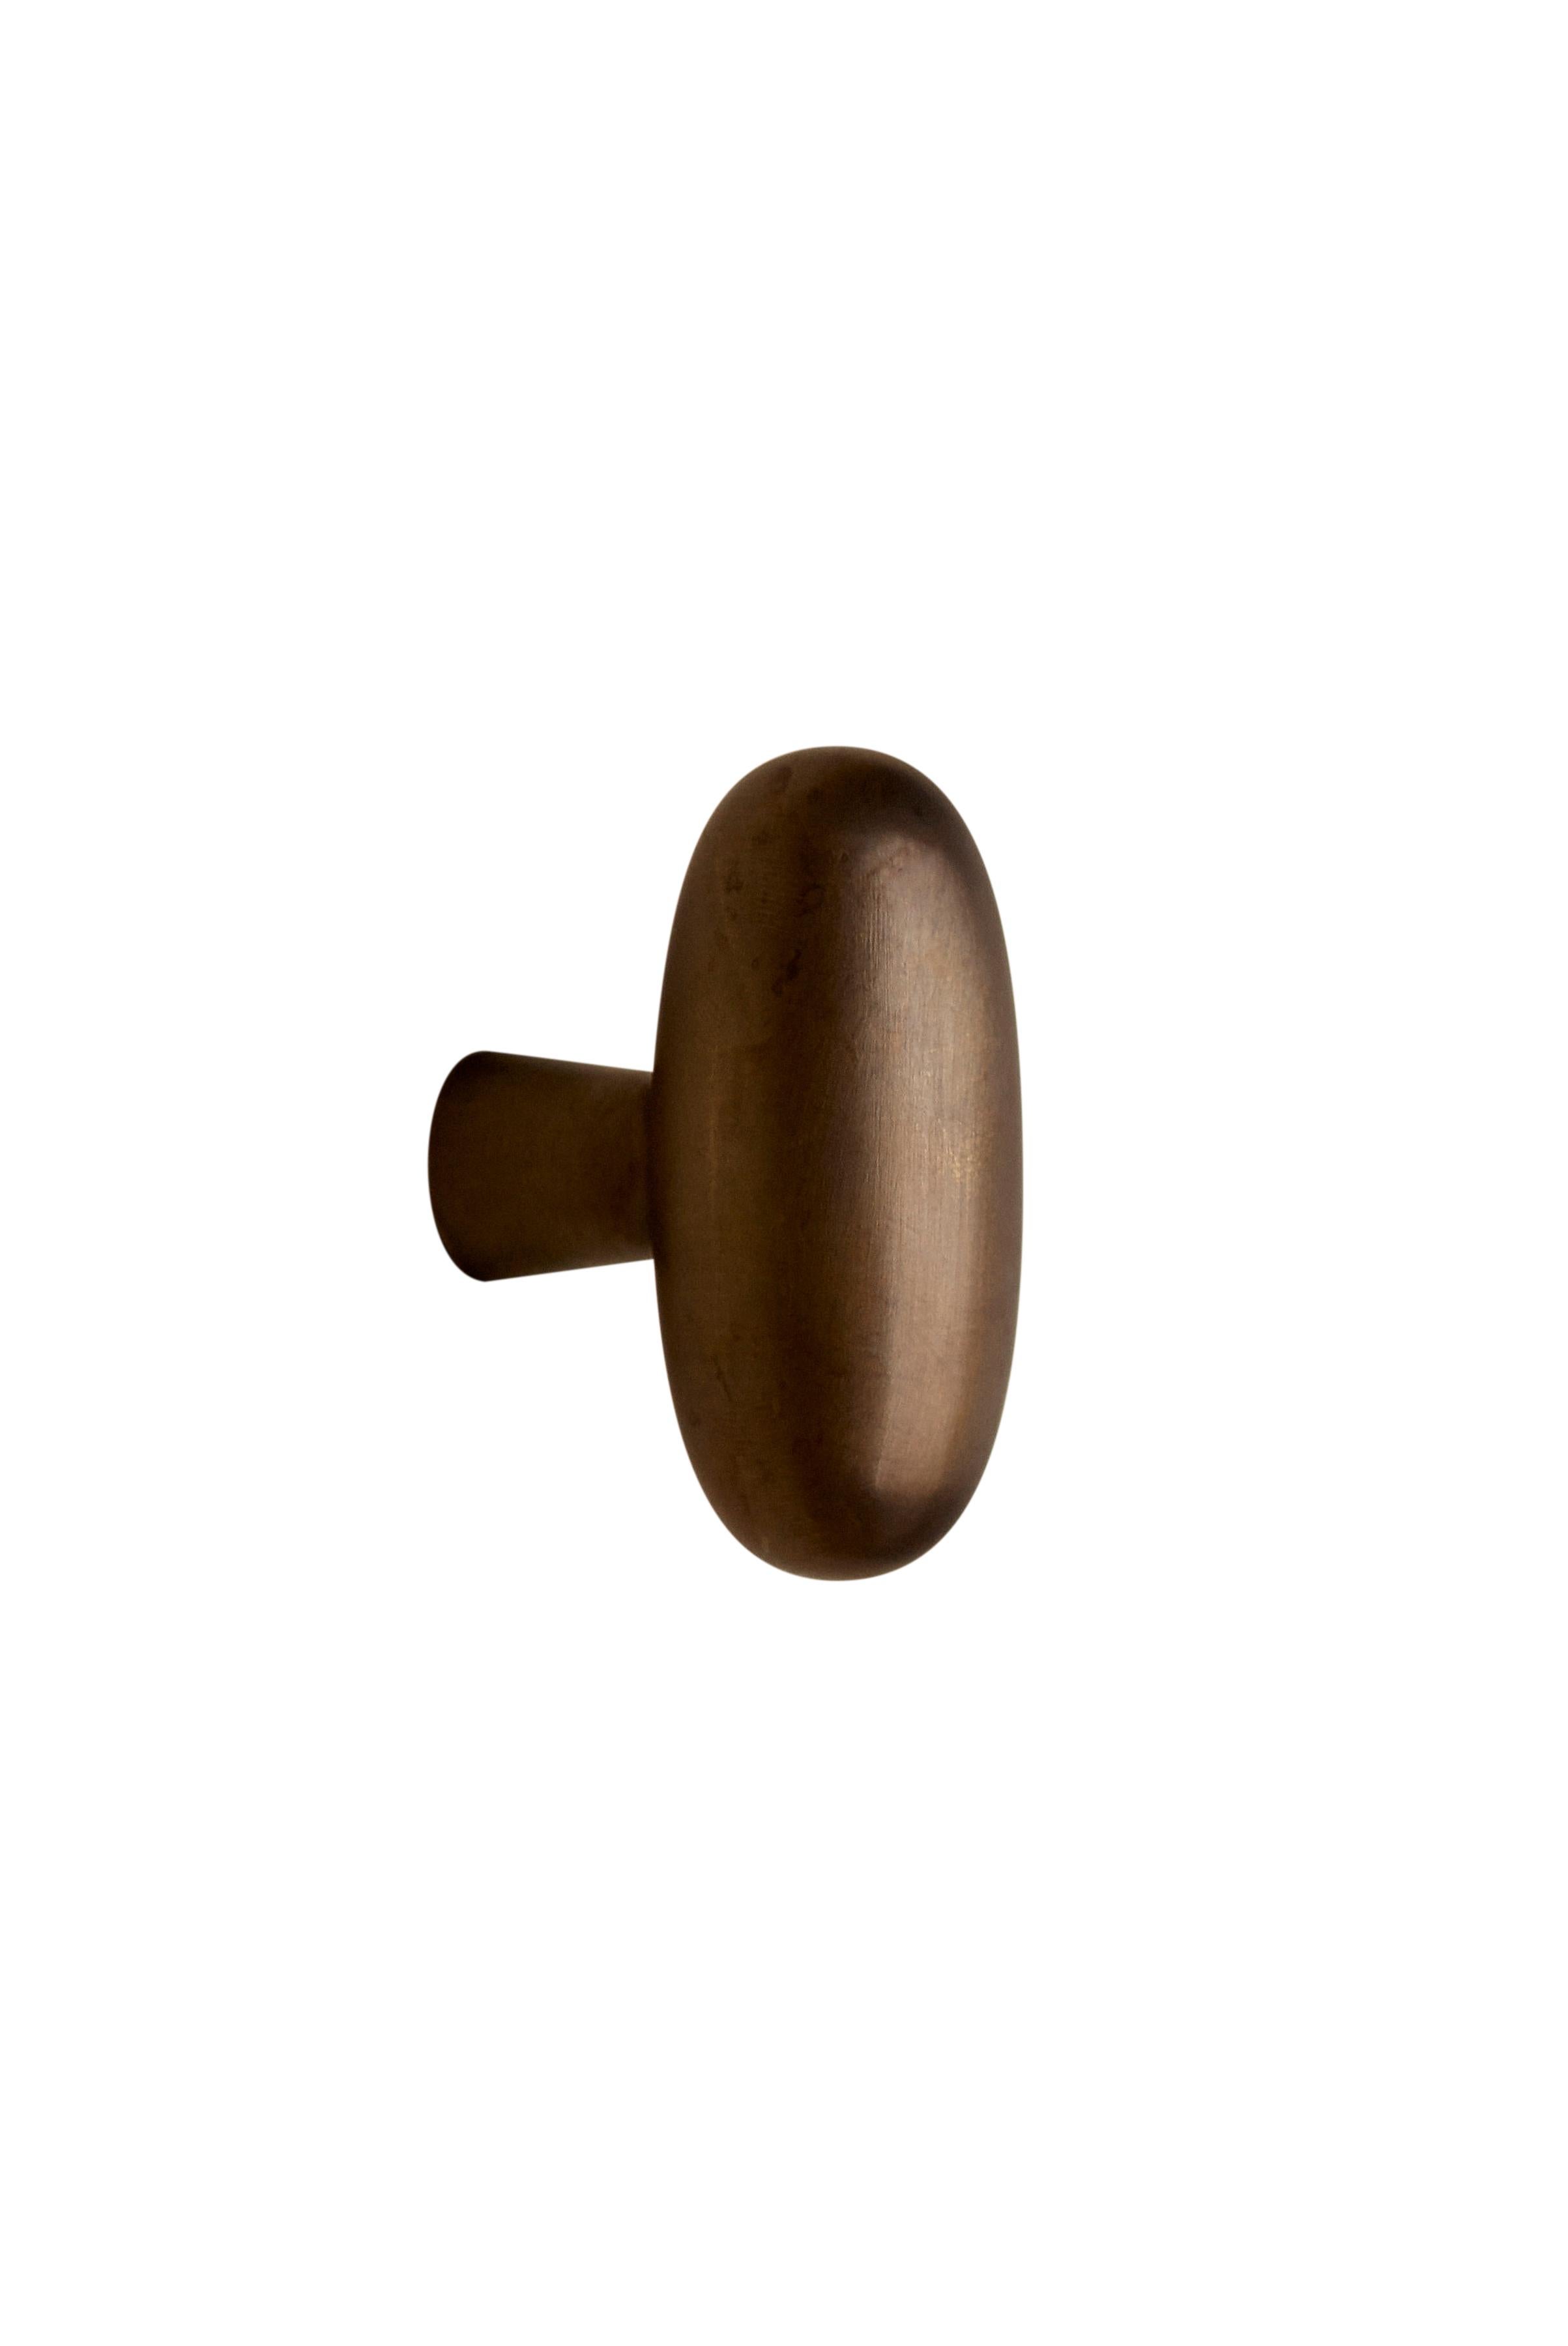 Contemporary Door Handle / Knob 'Blunt' by Spaces Within, Polished Brass For Sale 4